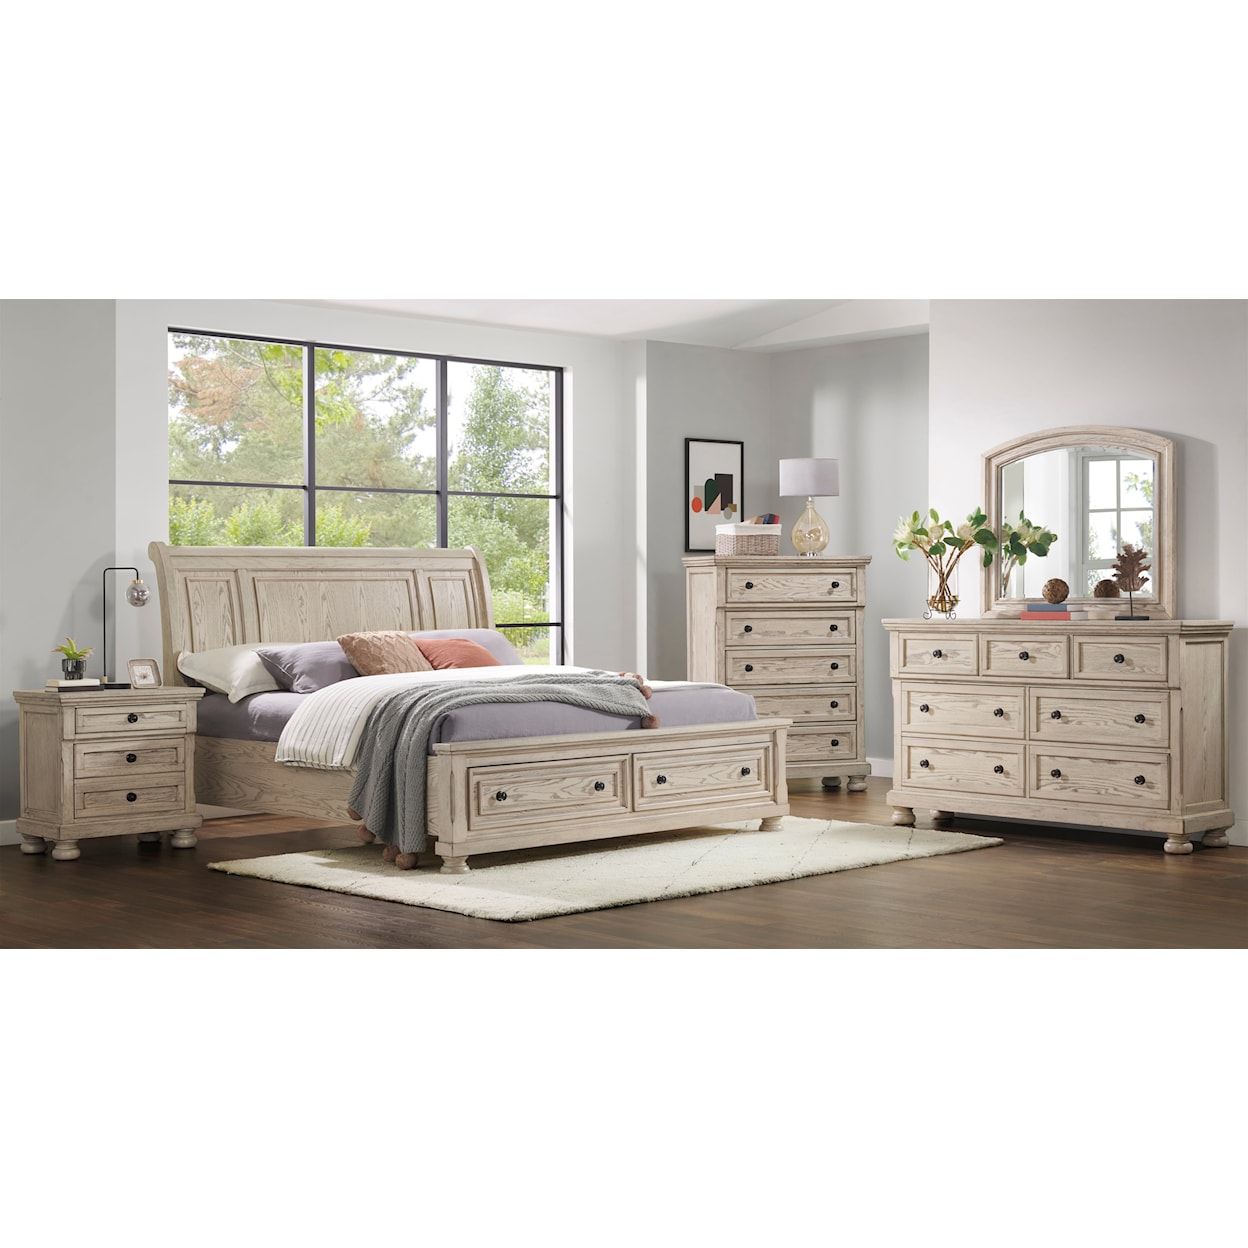 New Classic Allegra King Bed